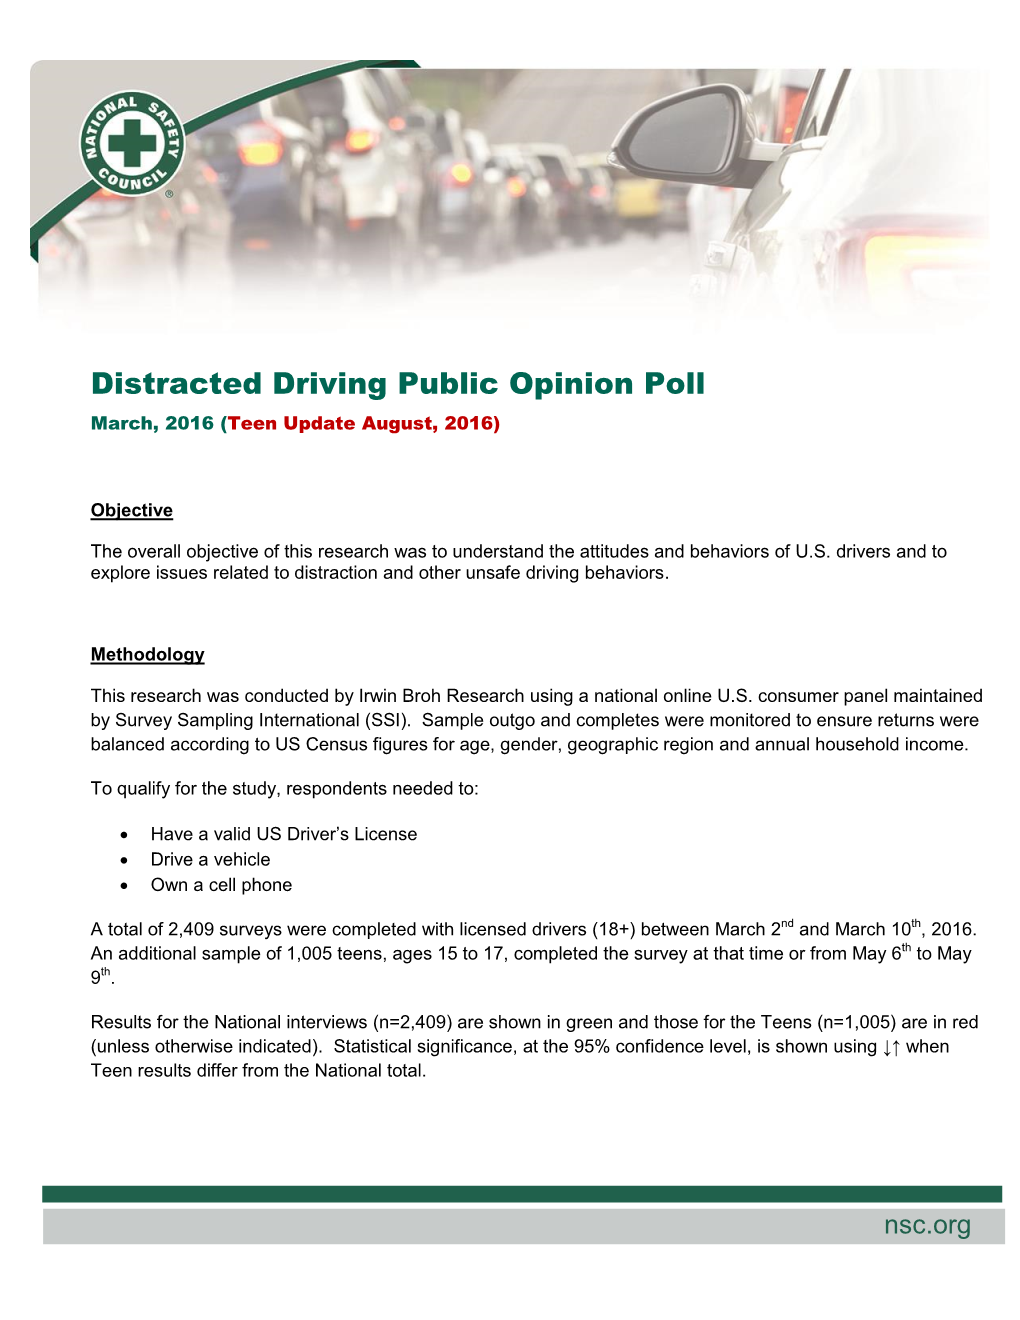 Distracted Driving Public Opinion Poll March, 2016 (Teen Update August, 2016)